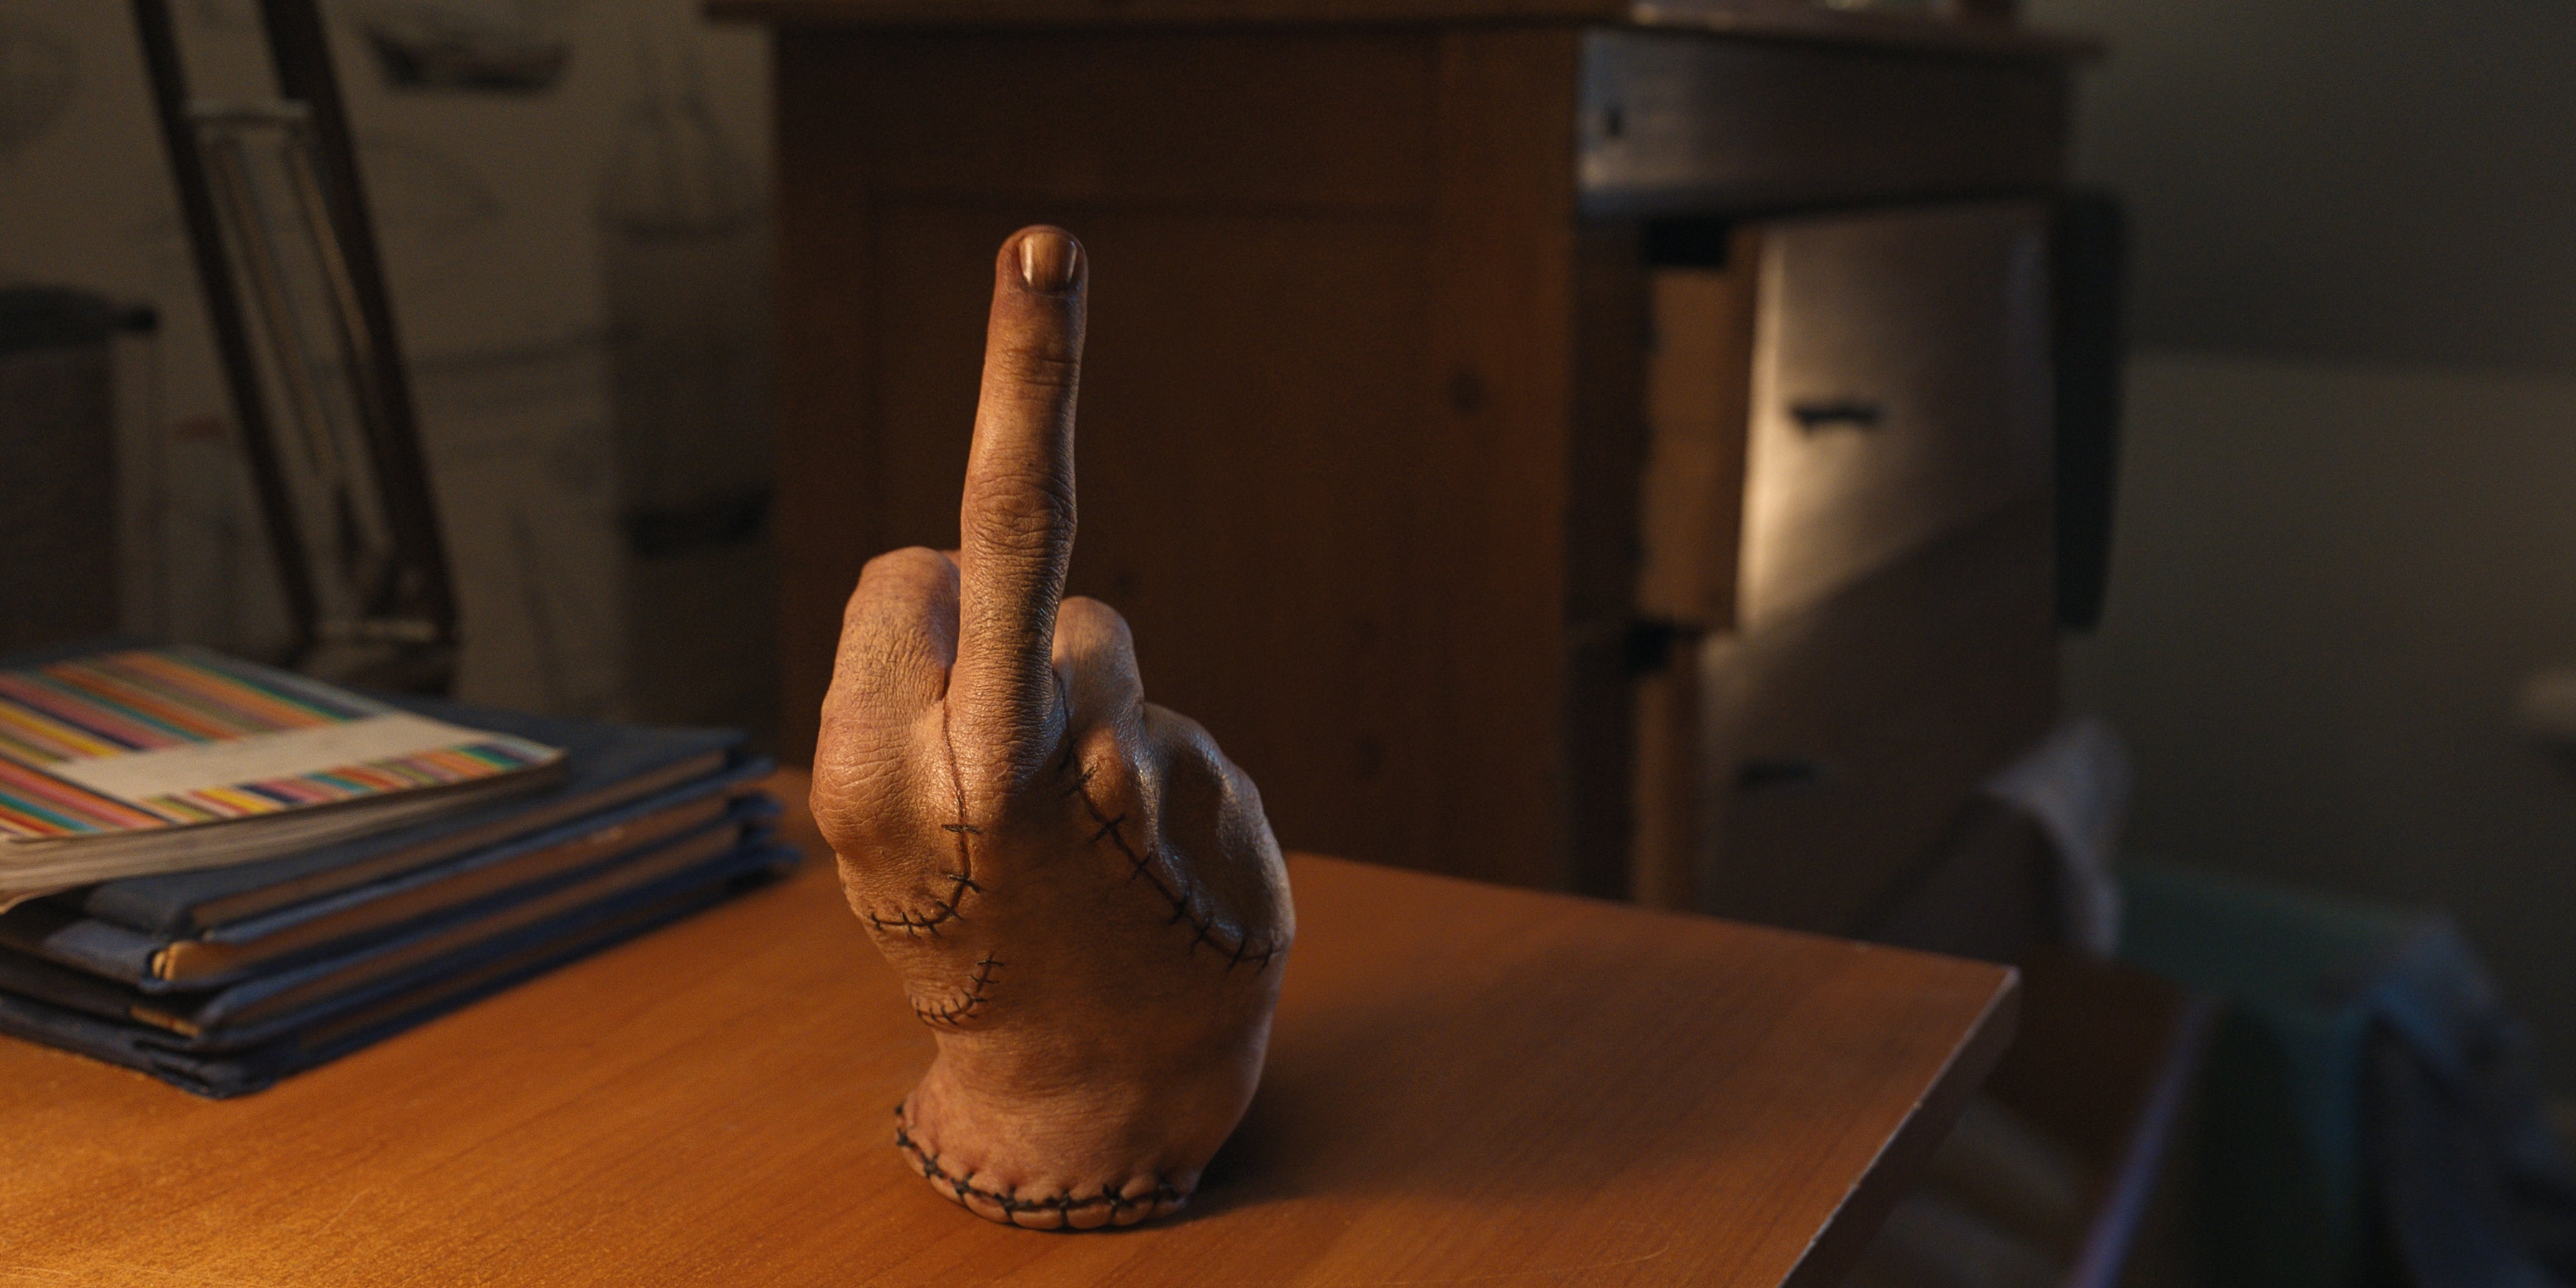 A disembodied hand with the middle finger raised.